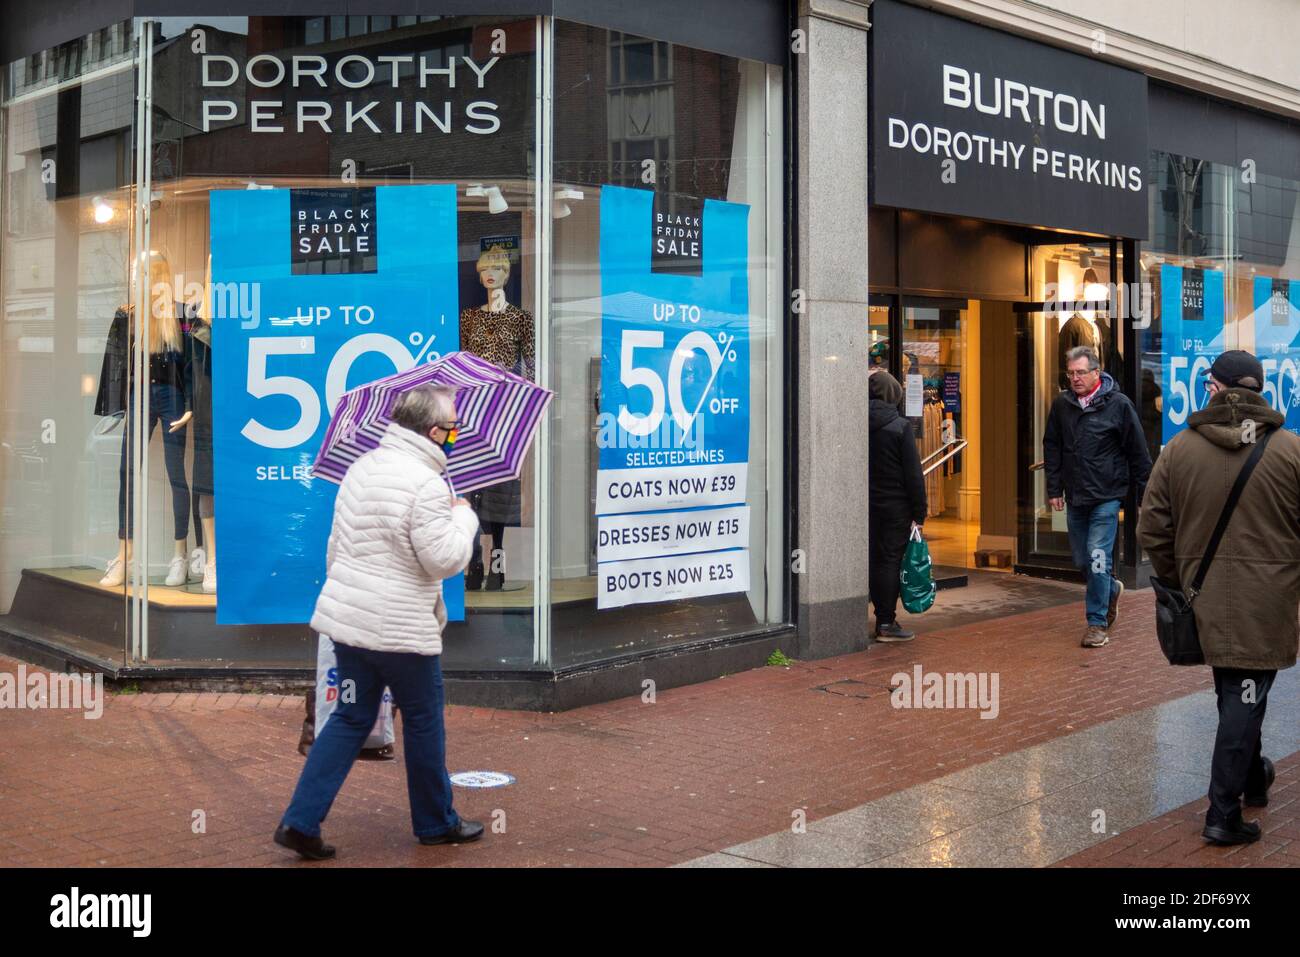 High Street, Southend on Sea, Essex, UK. 3rd Dec, 2020. Despite the sleety cold and wet weather shoppers are out in the High Street in Southend on Sea, including visiting the troubled Arcadia Group owned Burton, Dorothy Perkins stores. The window display is advertising Black Friday sale. The High Street has already lost many of its shops Stock Photo